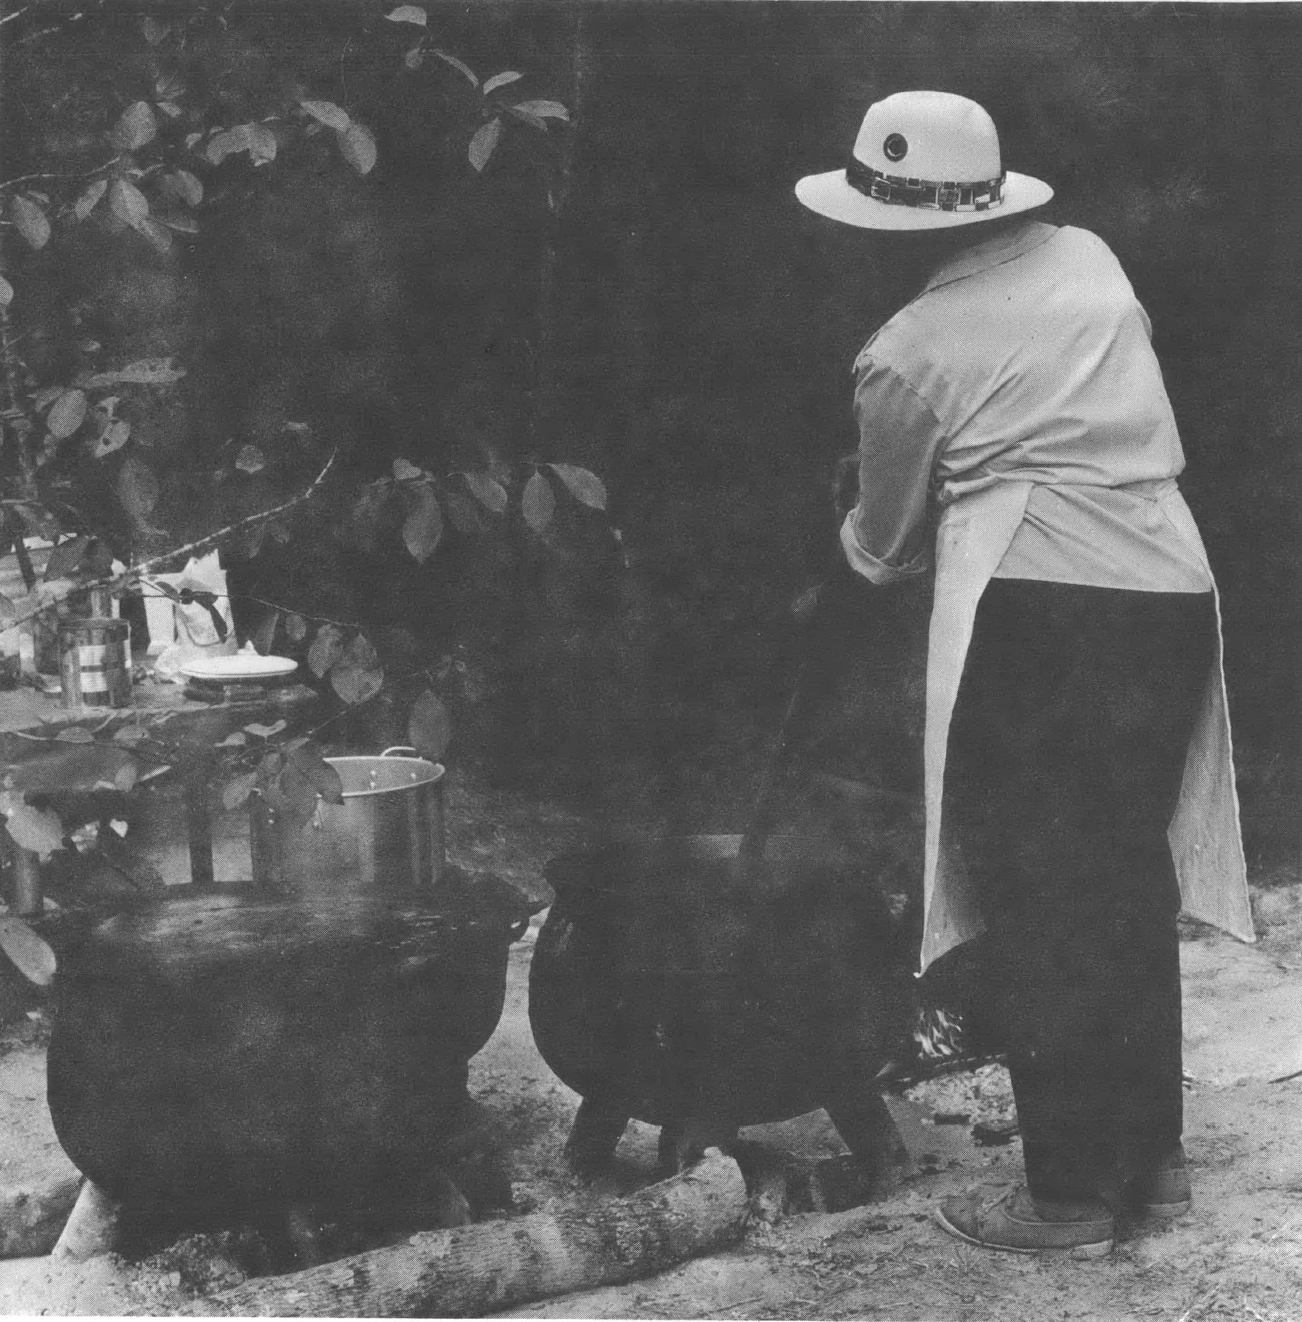 Person with back to camera, in white hat and apron, standing and stirring a black cauldron on the ground